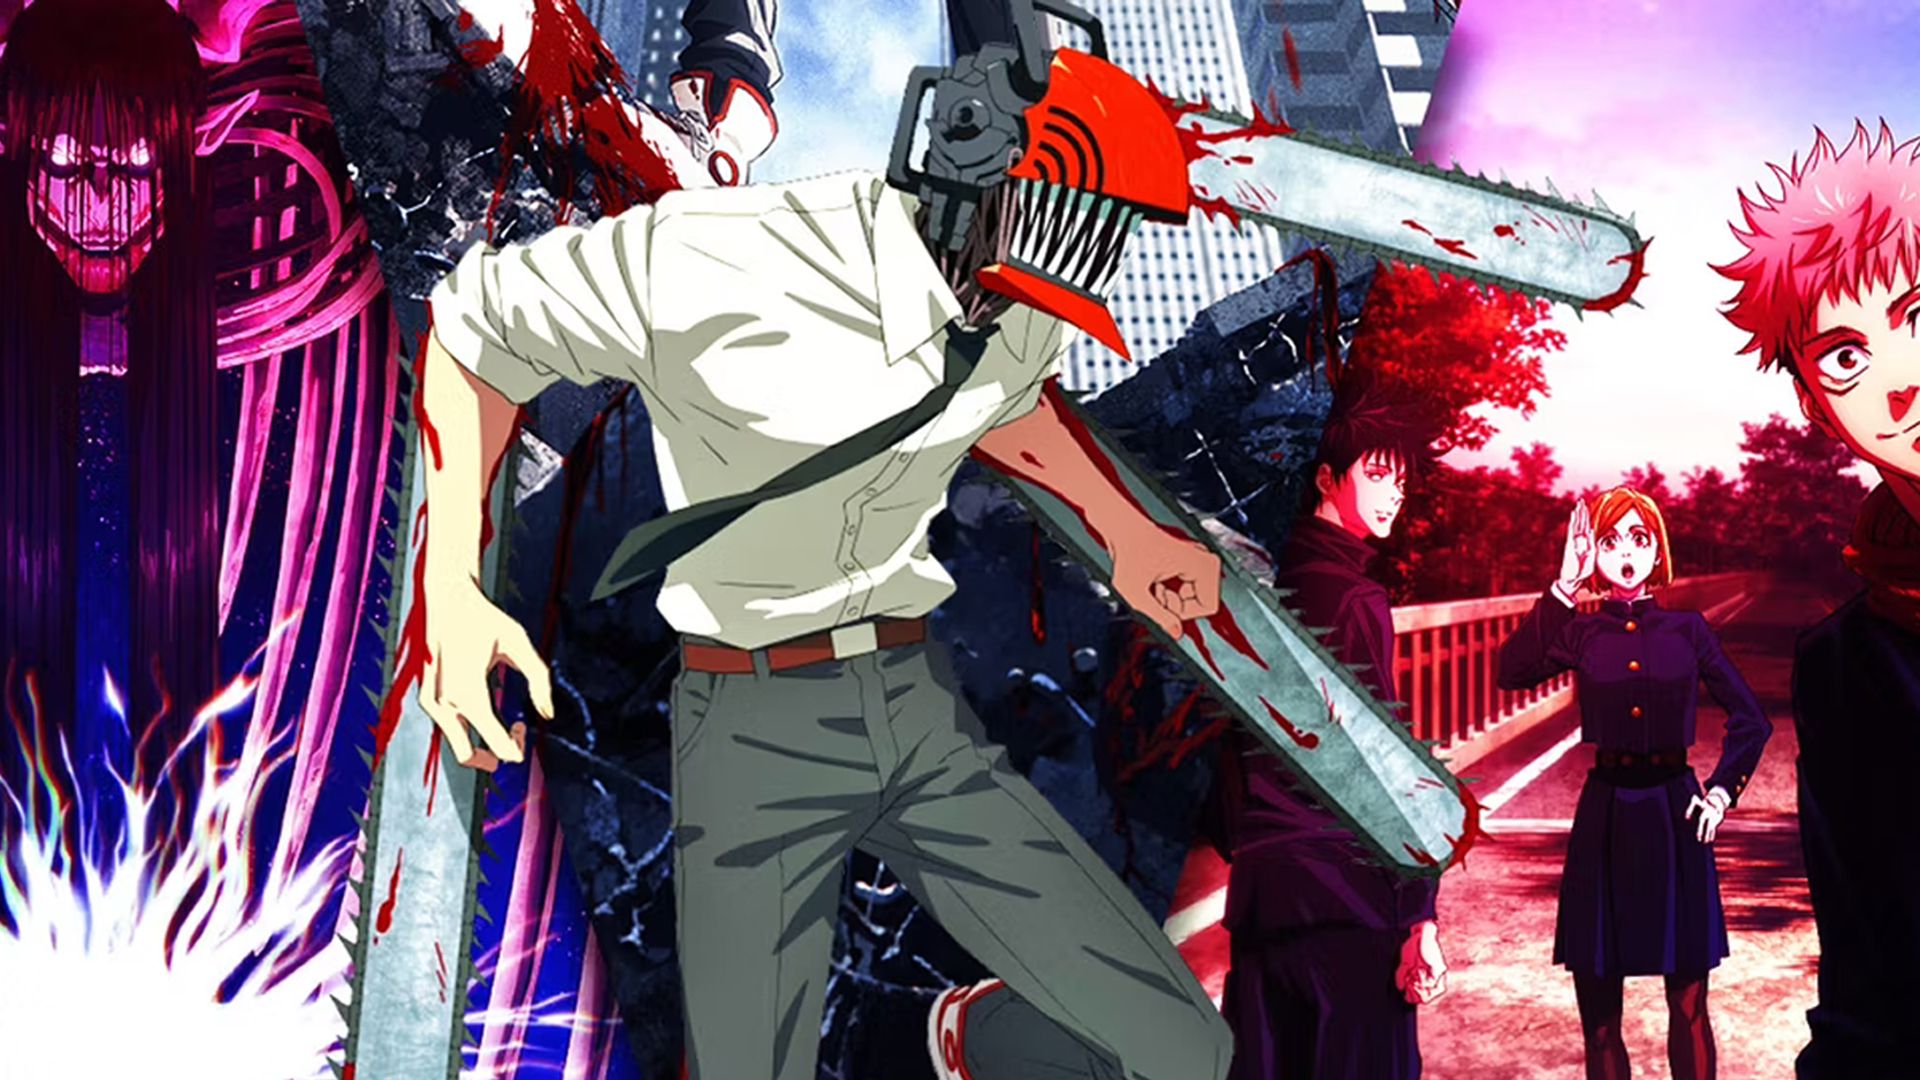 Chainsaw Man' rips and tears into the hearts of anime lovers